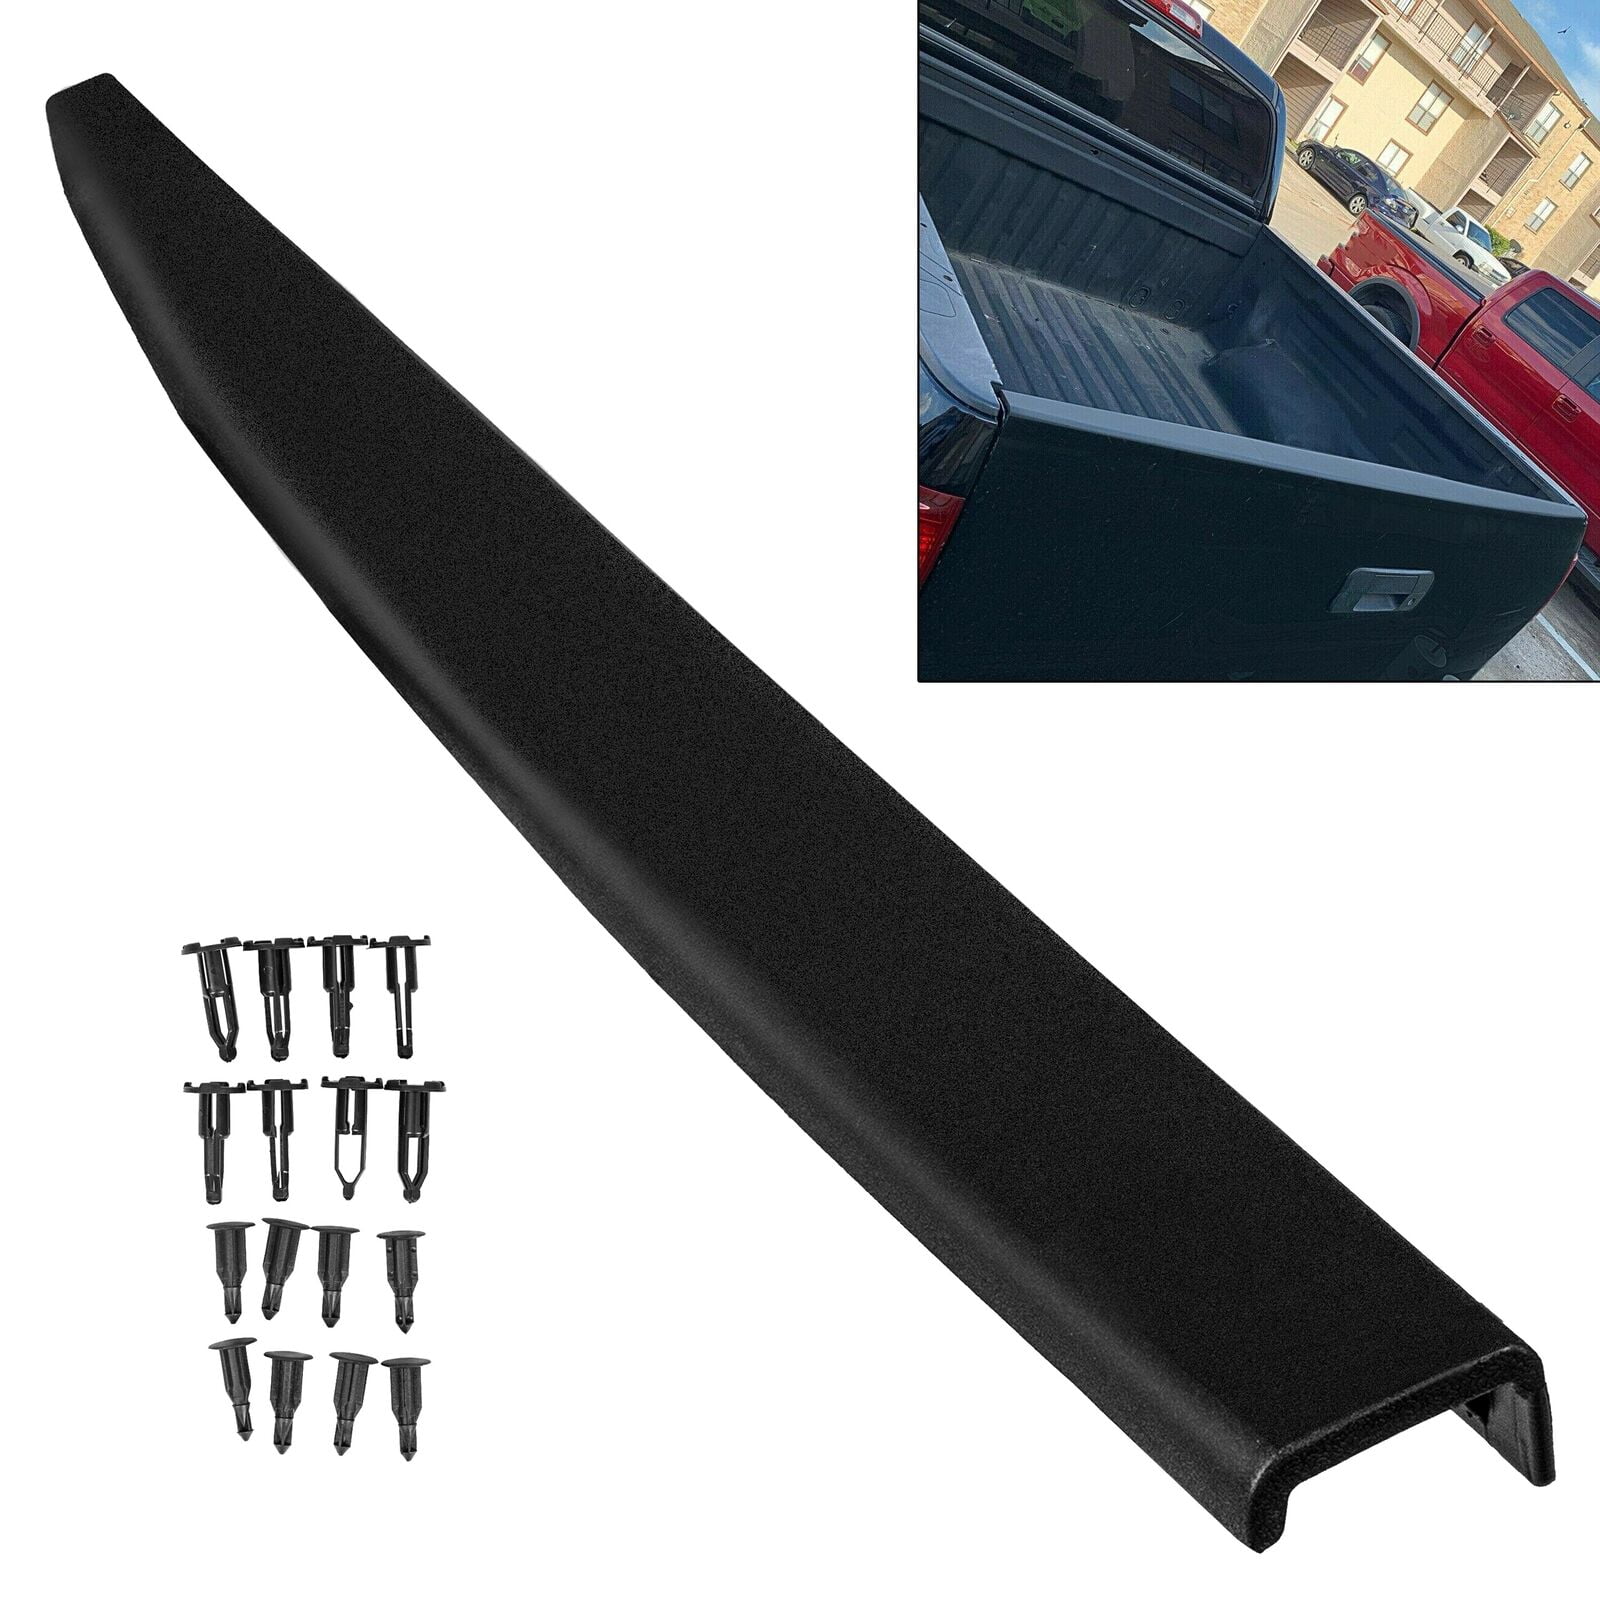 Make Auto Parts Manufacturing Top Protector Tailgate Molding Plastic Black For Toyota Tundra 2007 2008 2009 2010 2011 2012 2013 TO1904101 